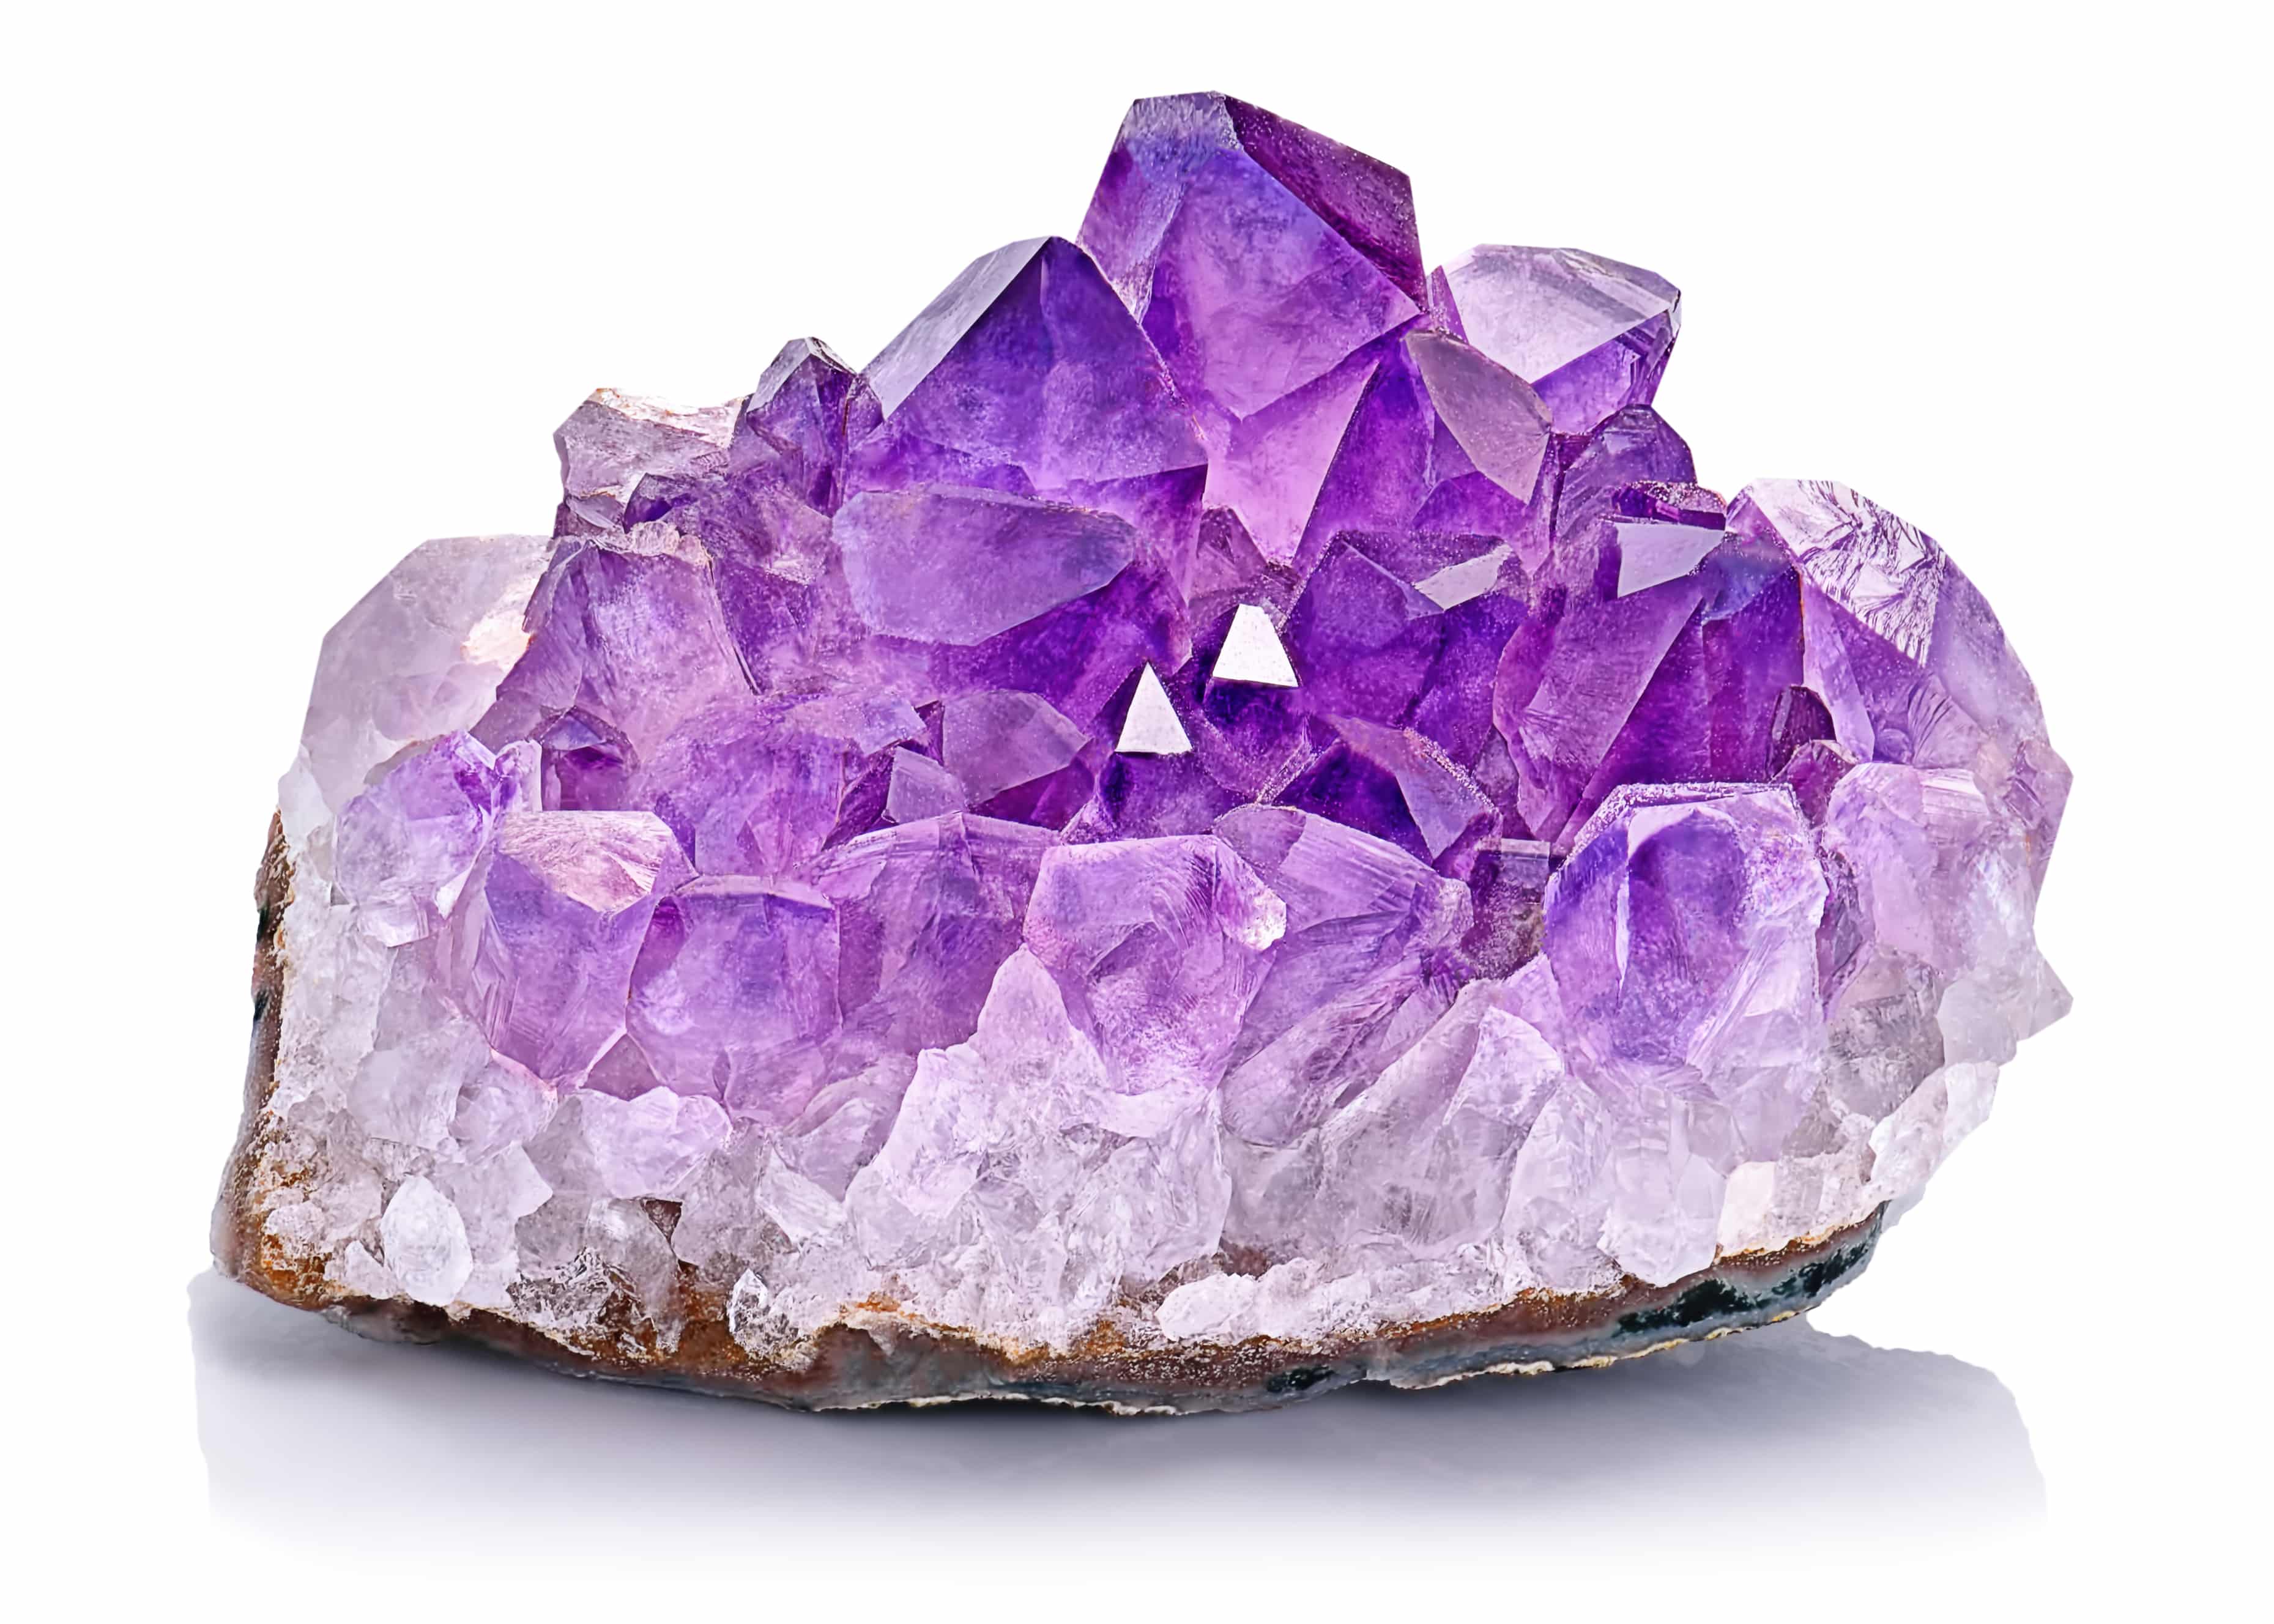 What Does Amethyst Mean Spiritually - Getting To Know Its Power